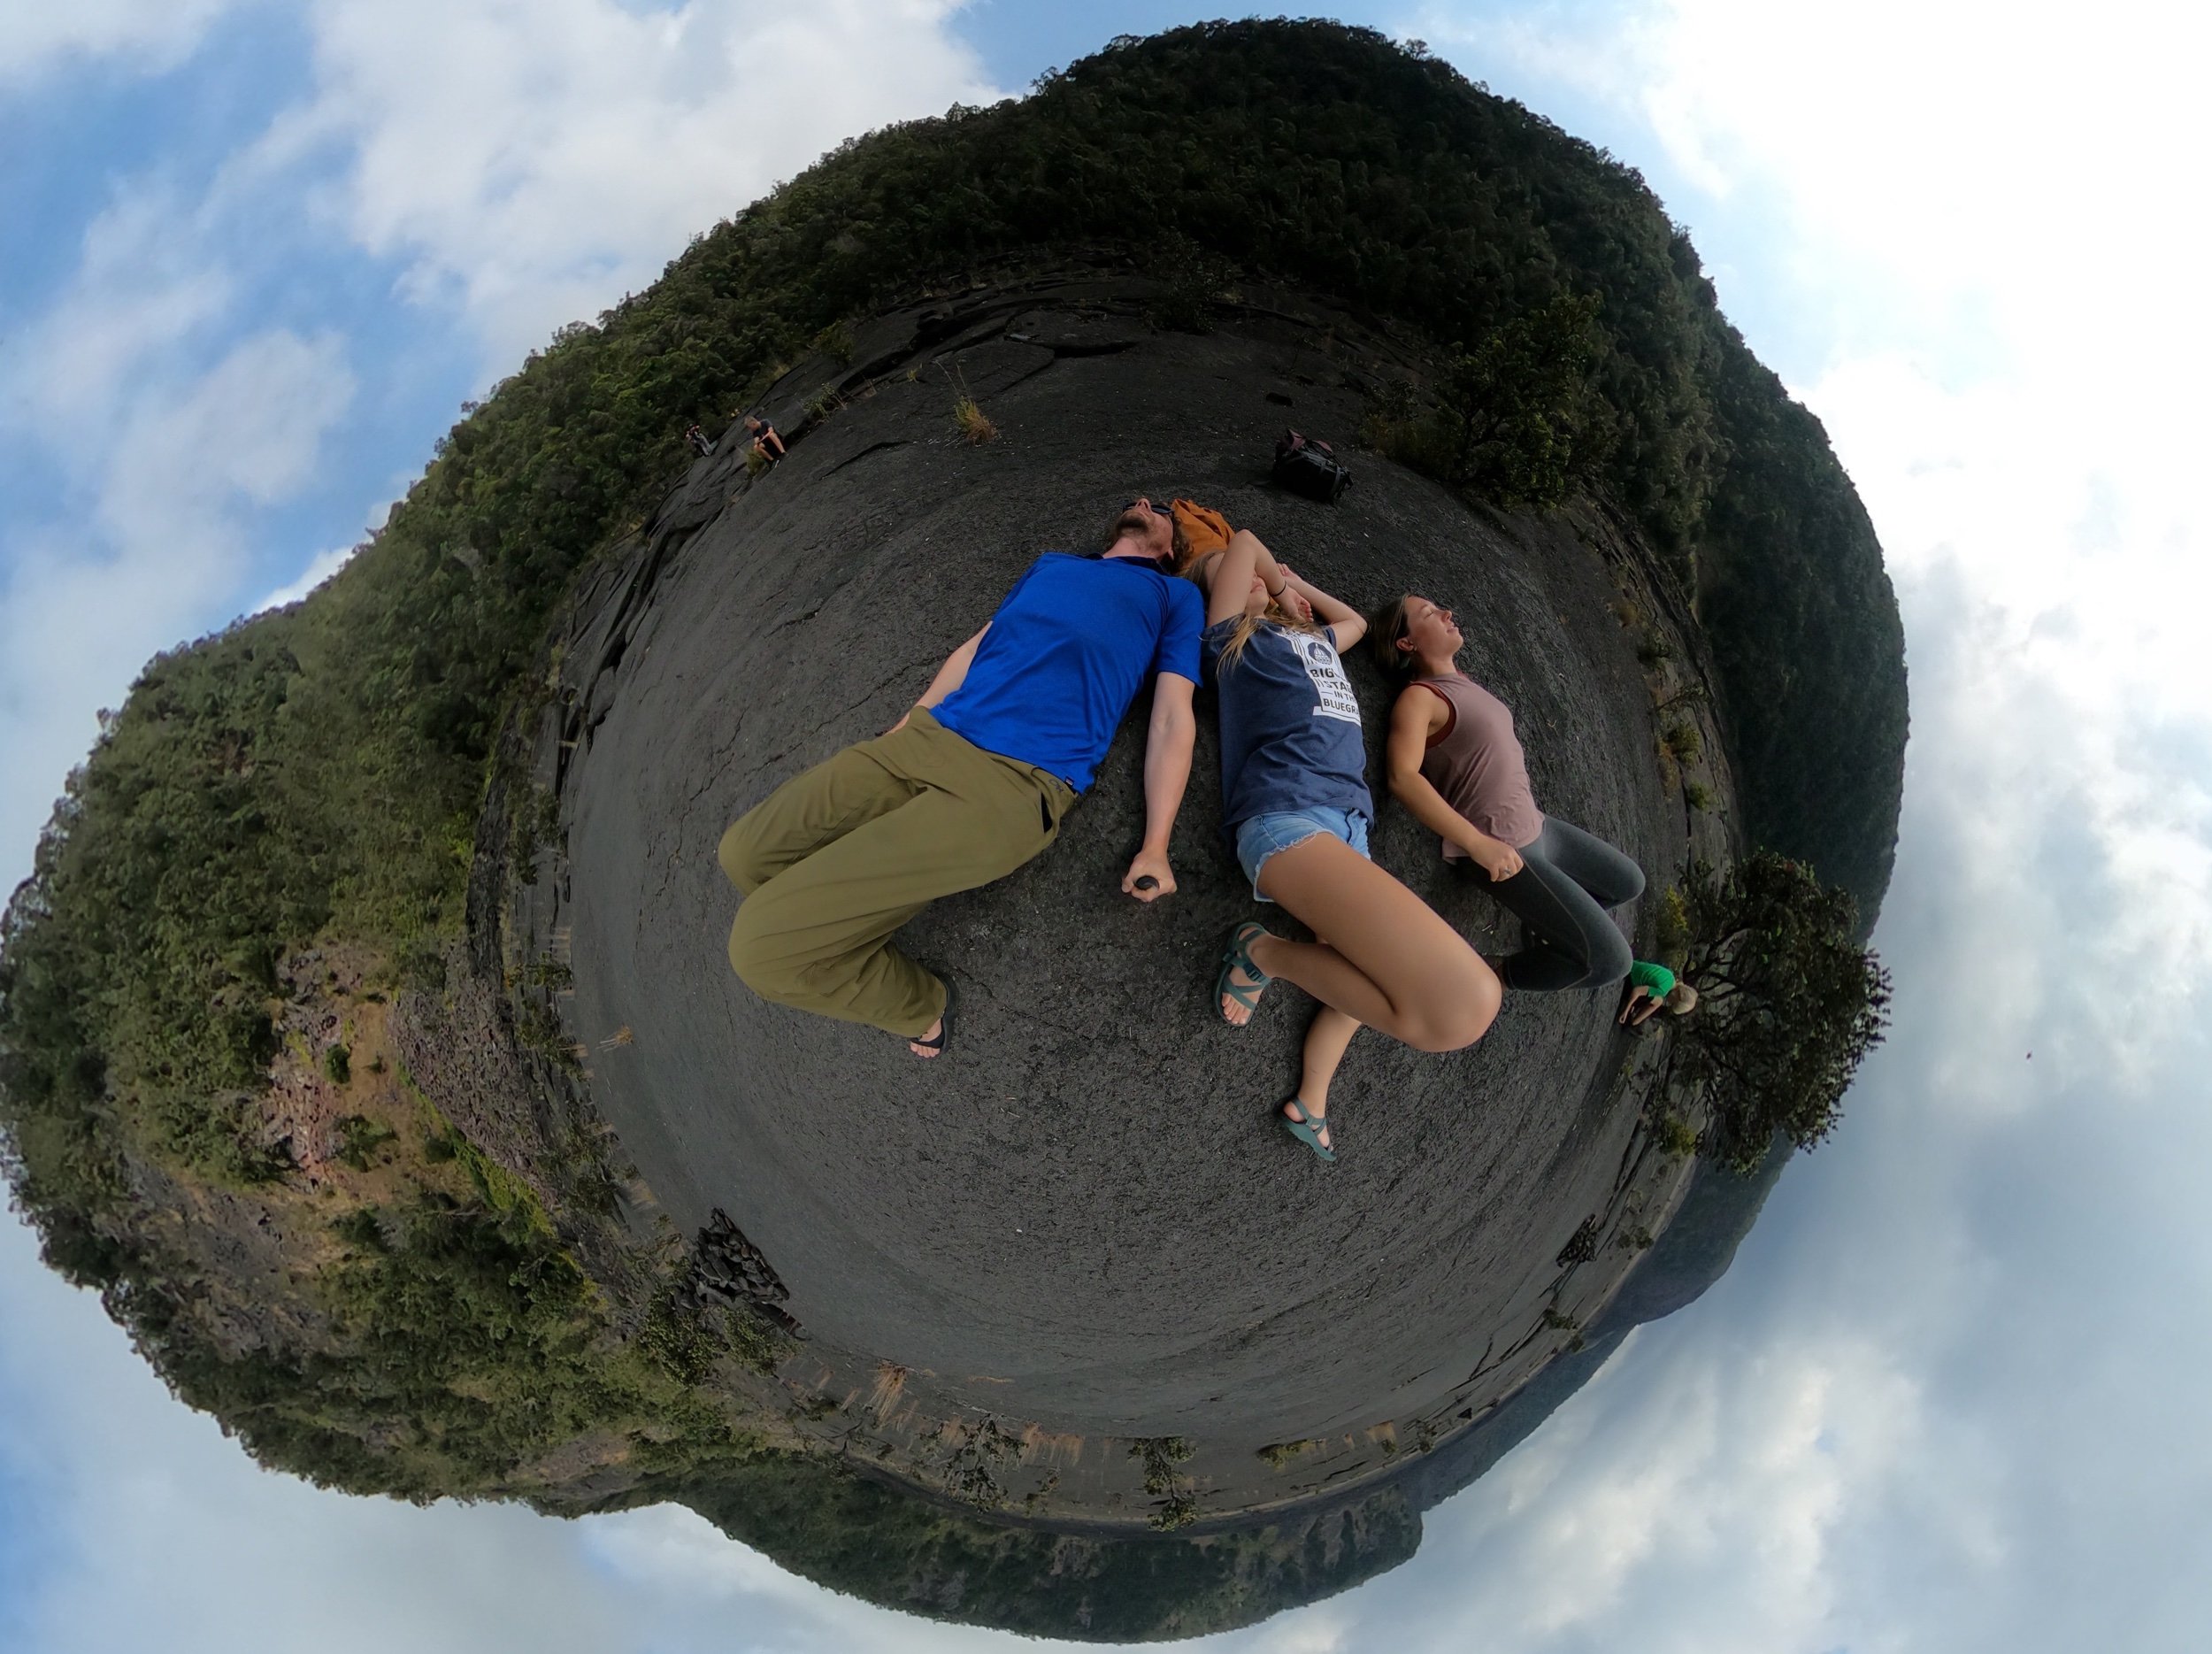  Chillin on the Hot Rock of the Kilauea Iki Crater 